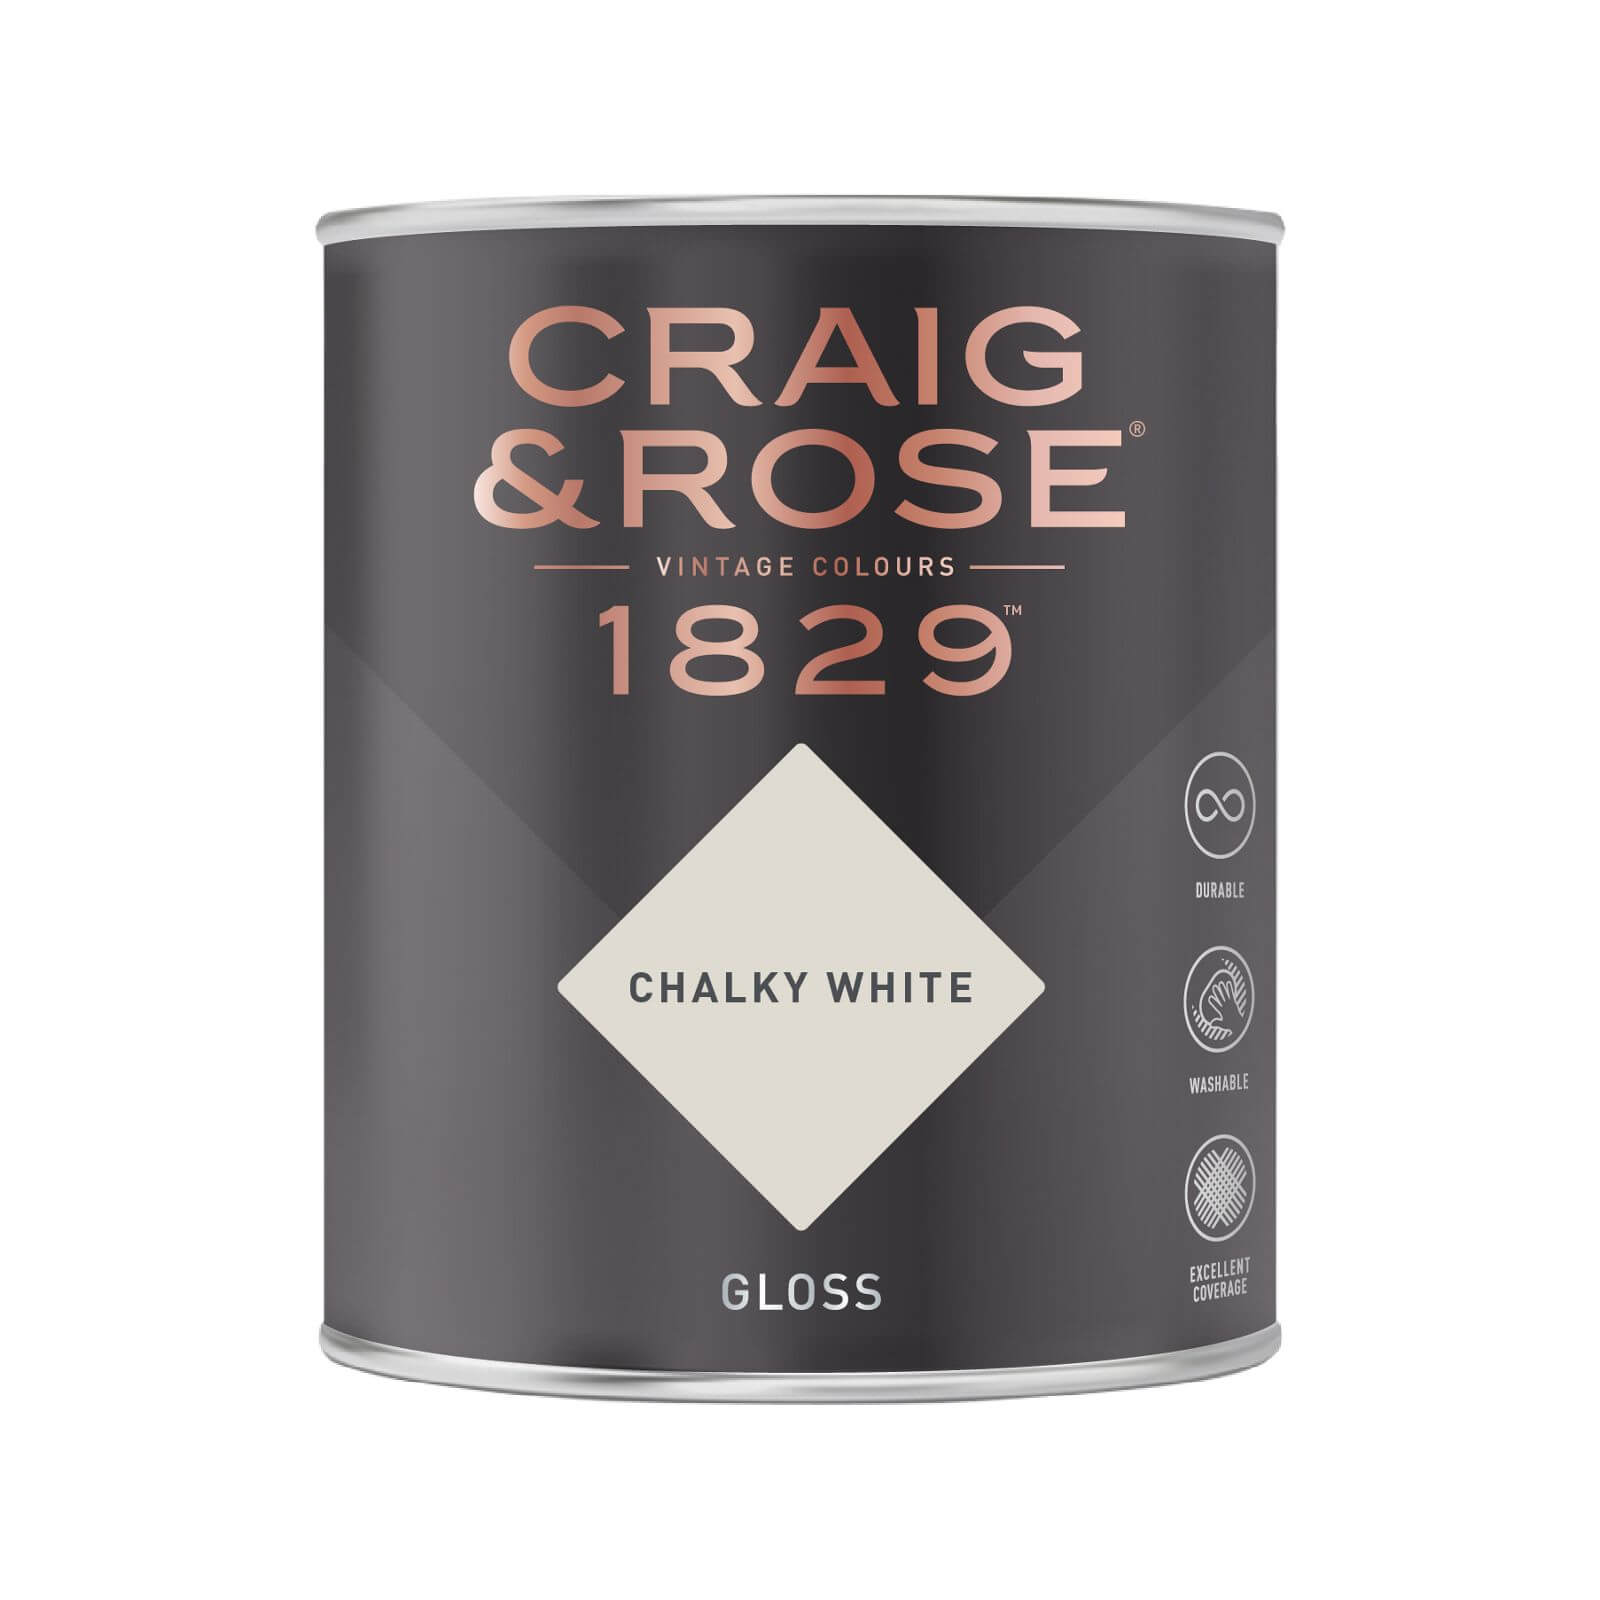 Craig & Rose 1829 Gloss Paint Chalky White - 750ml